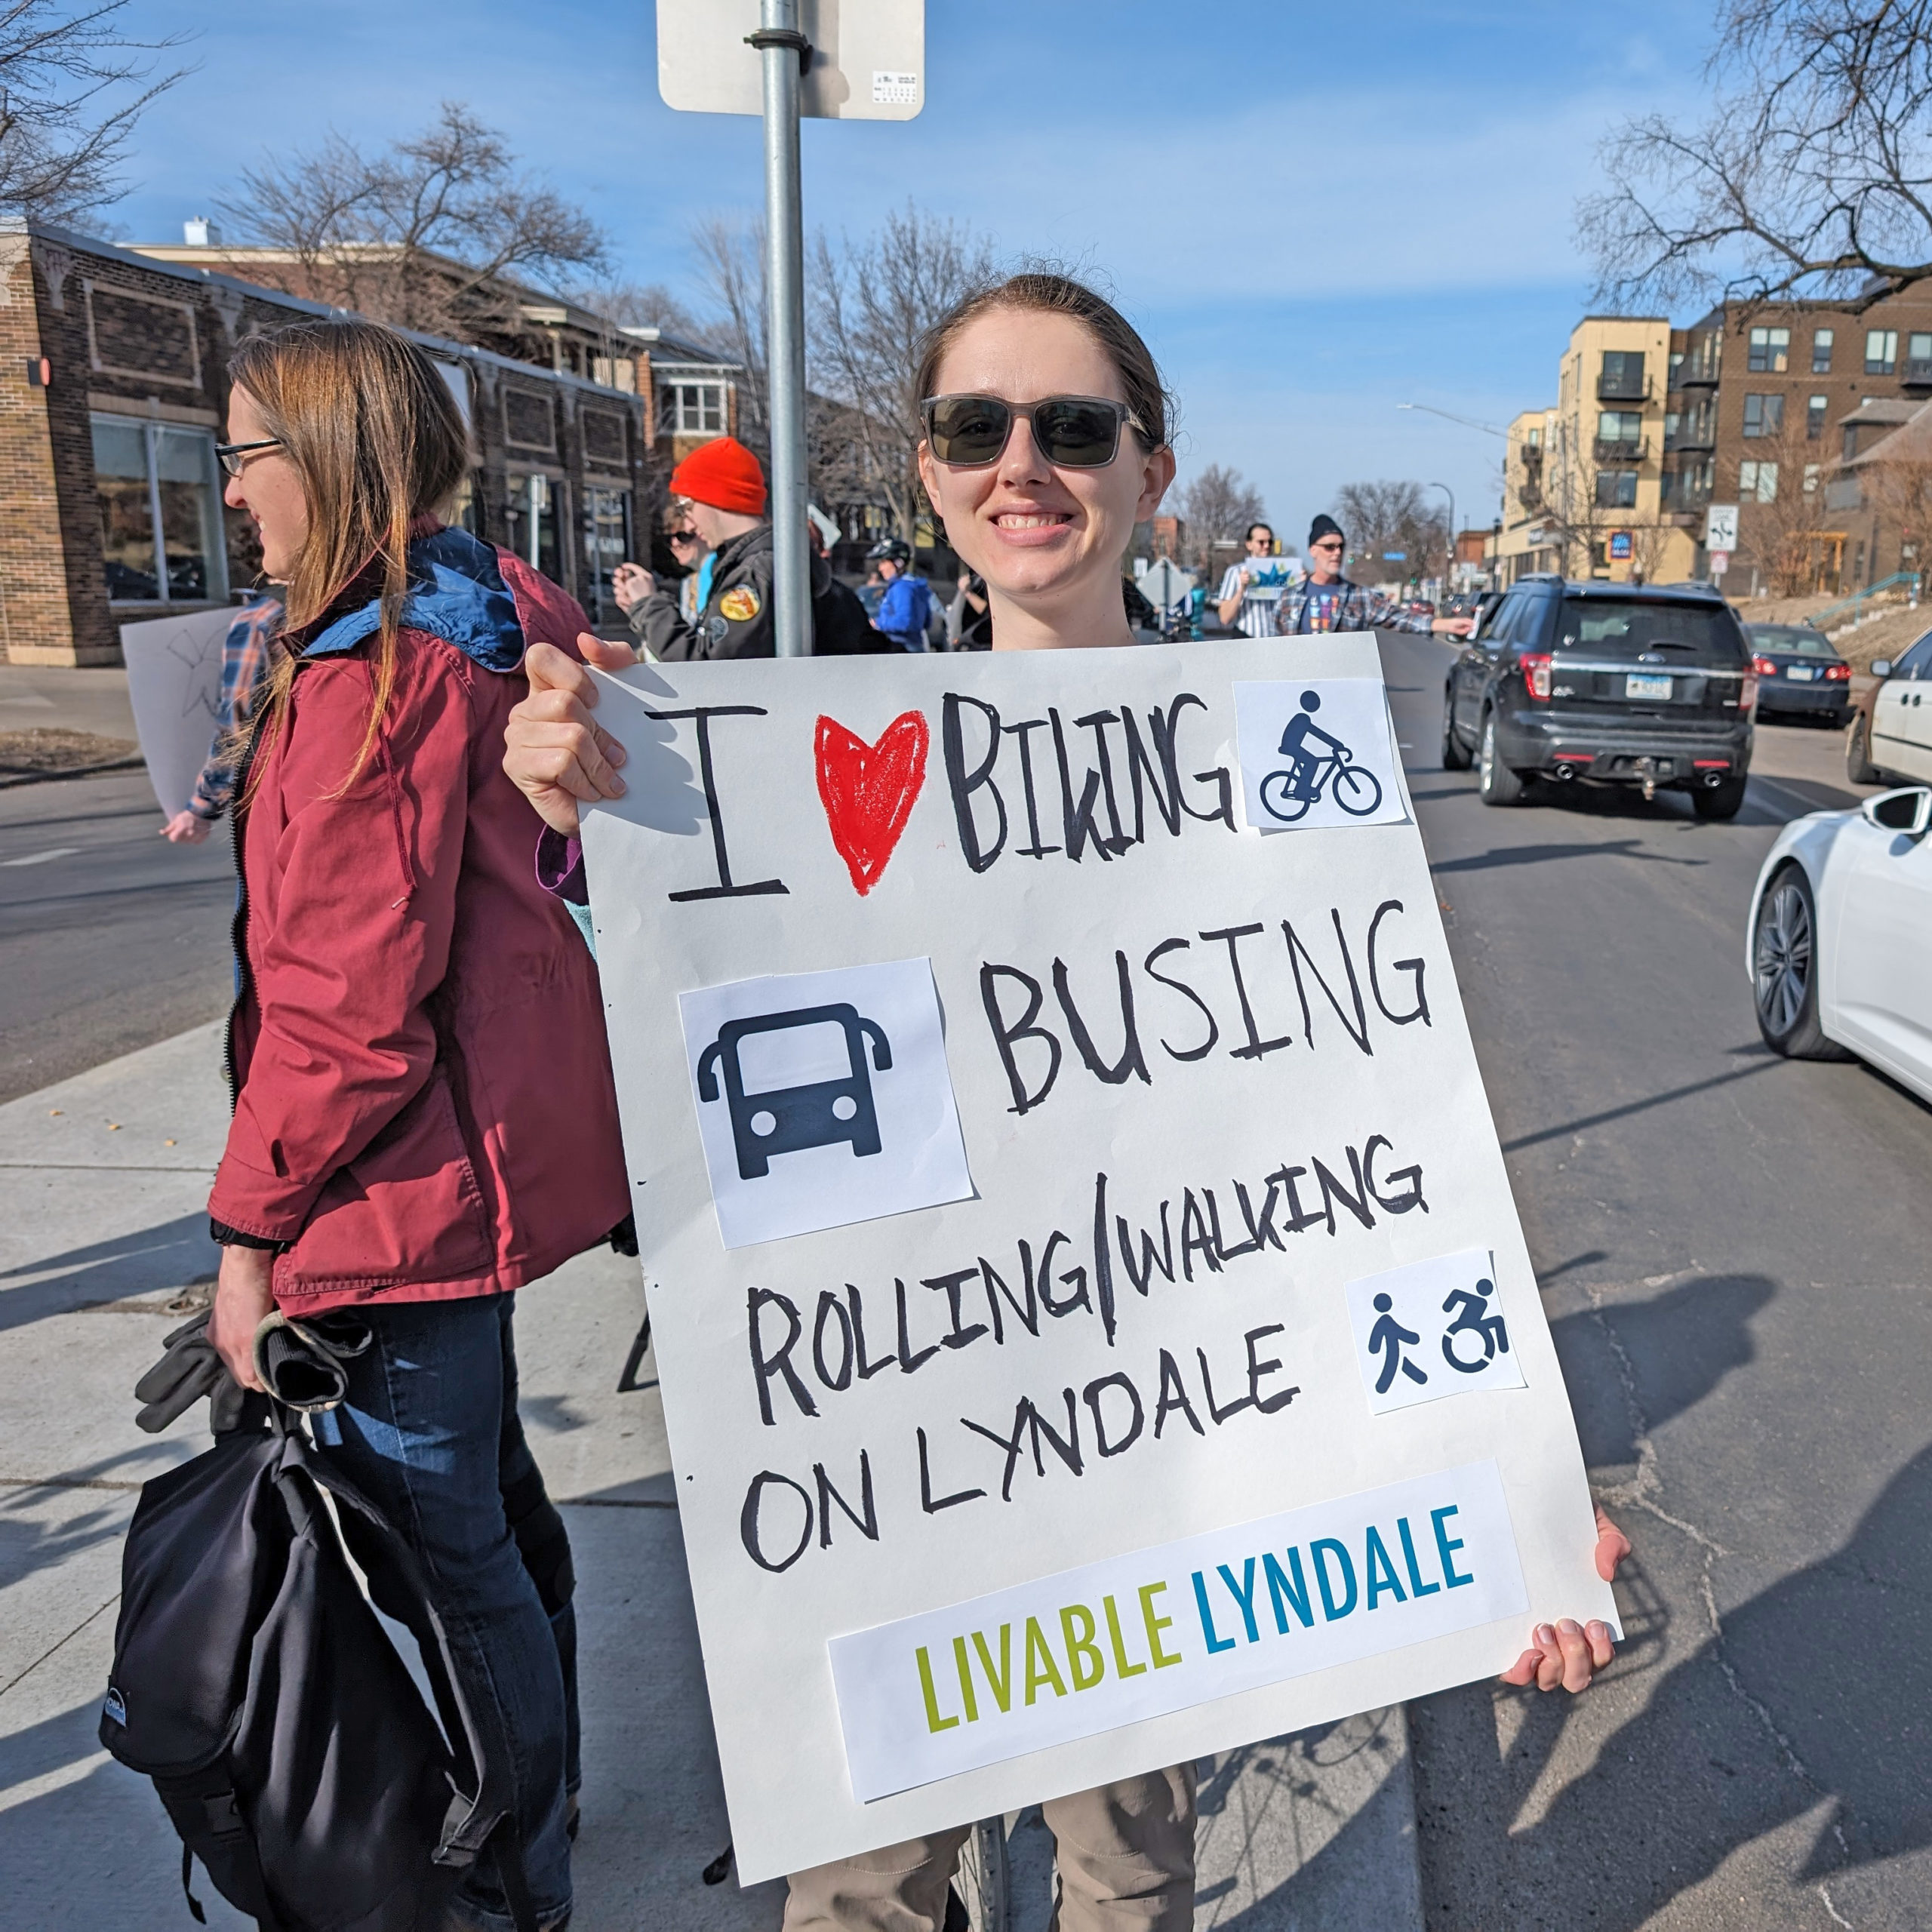 A community member at the Livable Lyndale rally in Minneapolis holds a hand-made sign that says "I love biking, bus, rolling/walking, on Lyndale."